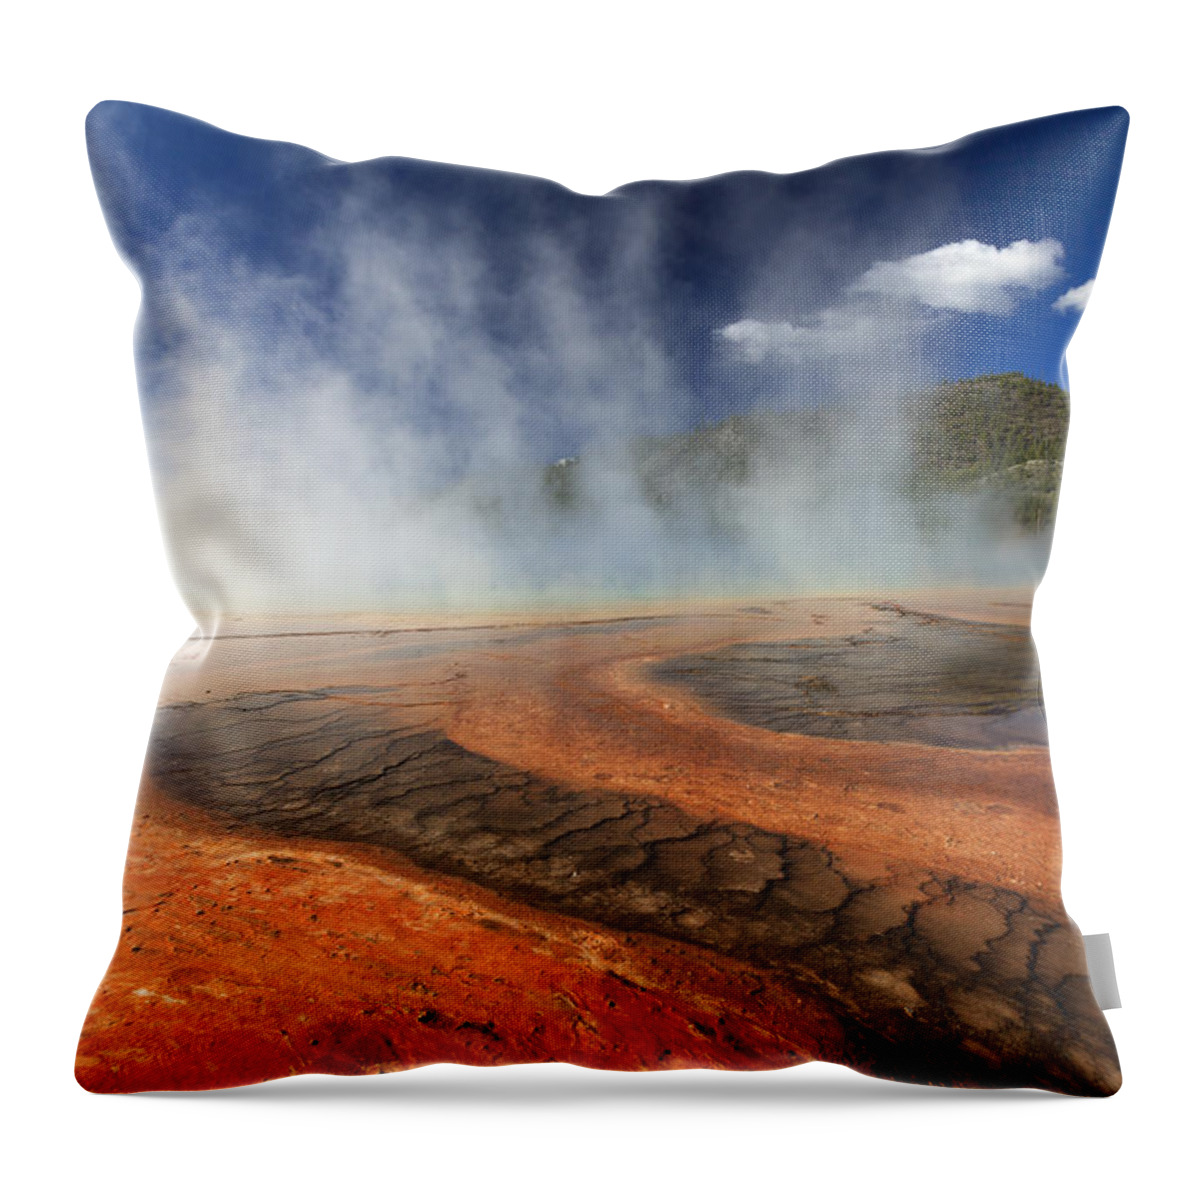 530440 Throw Pillow featuring the photograph Grand Prismatic Spring Yellowstone Np by Duncan Usher